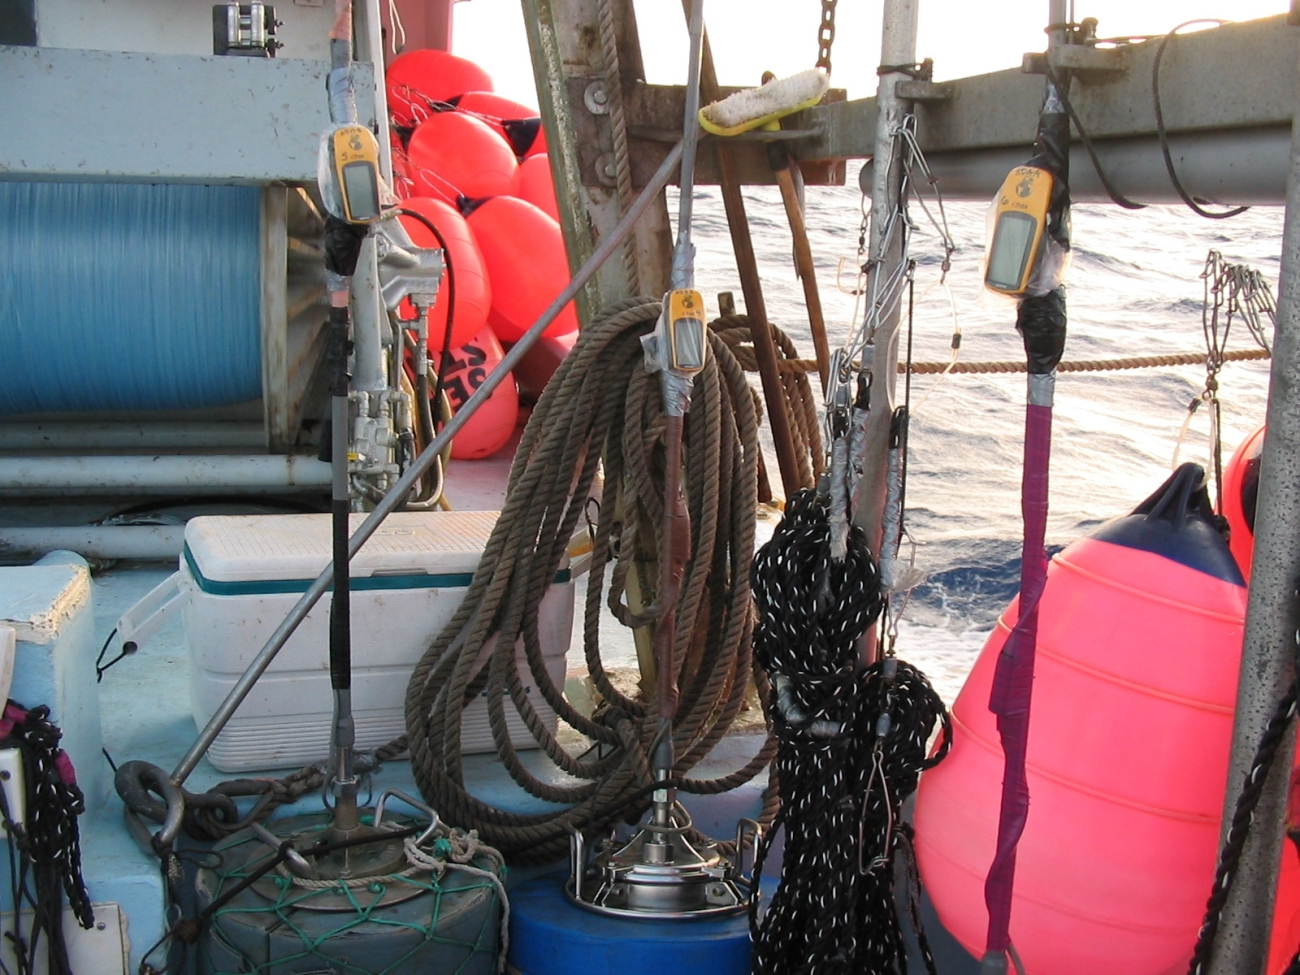 An assemblage of fishing gear